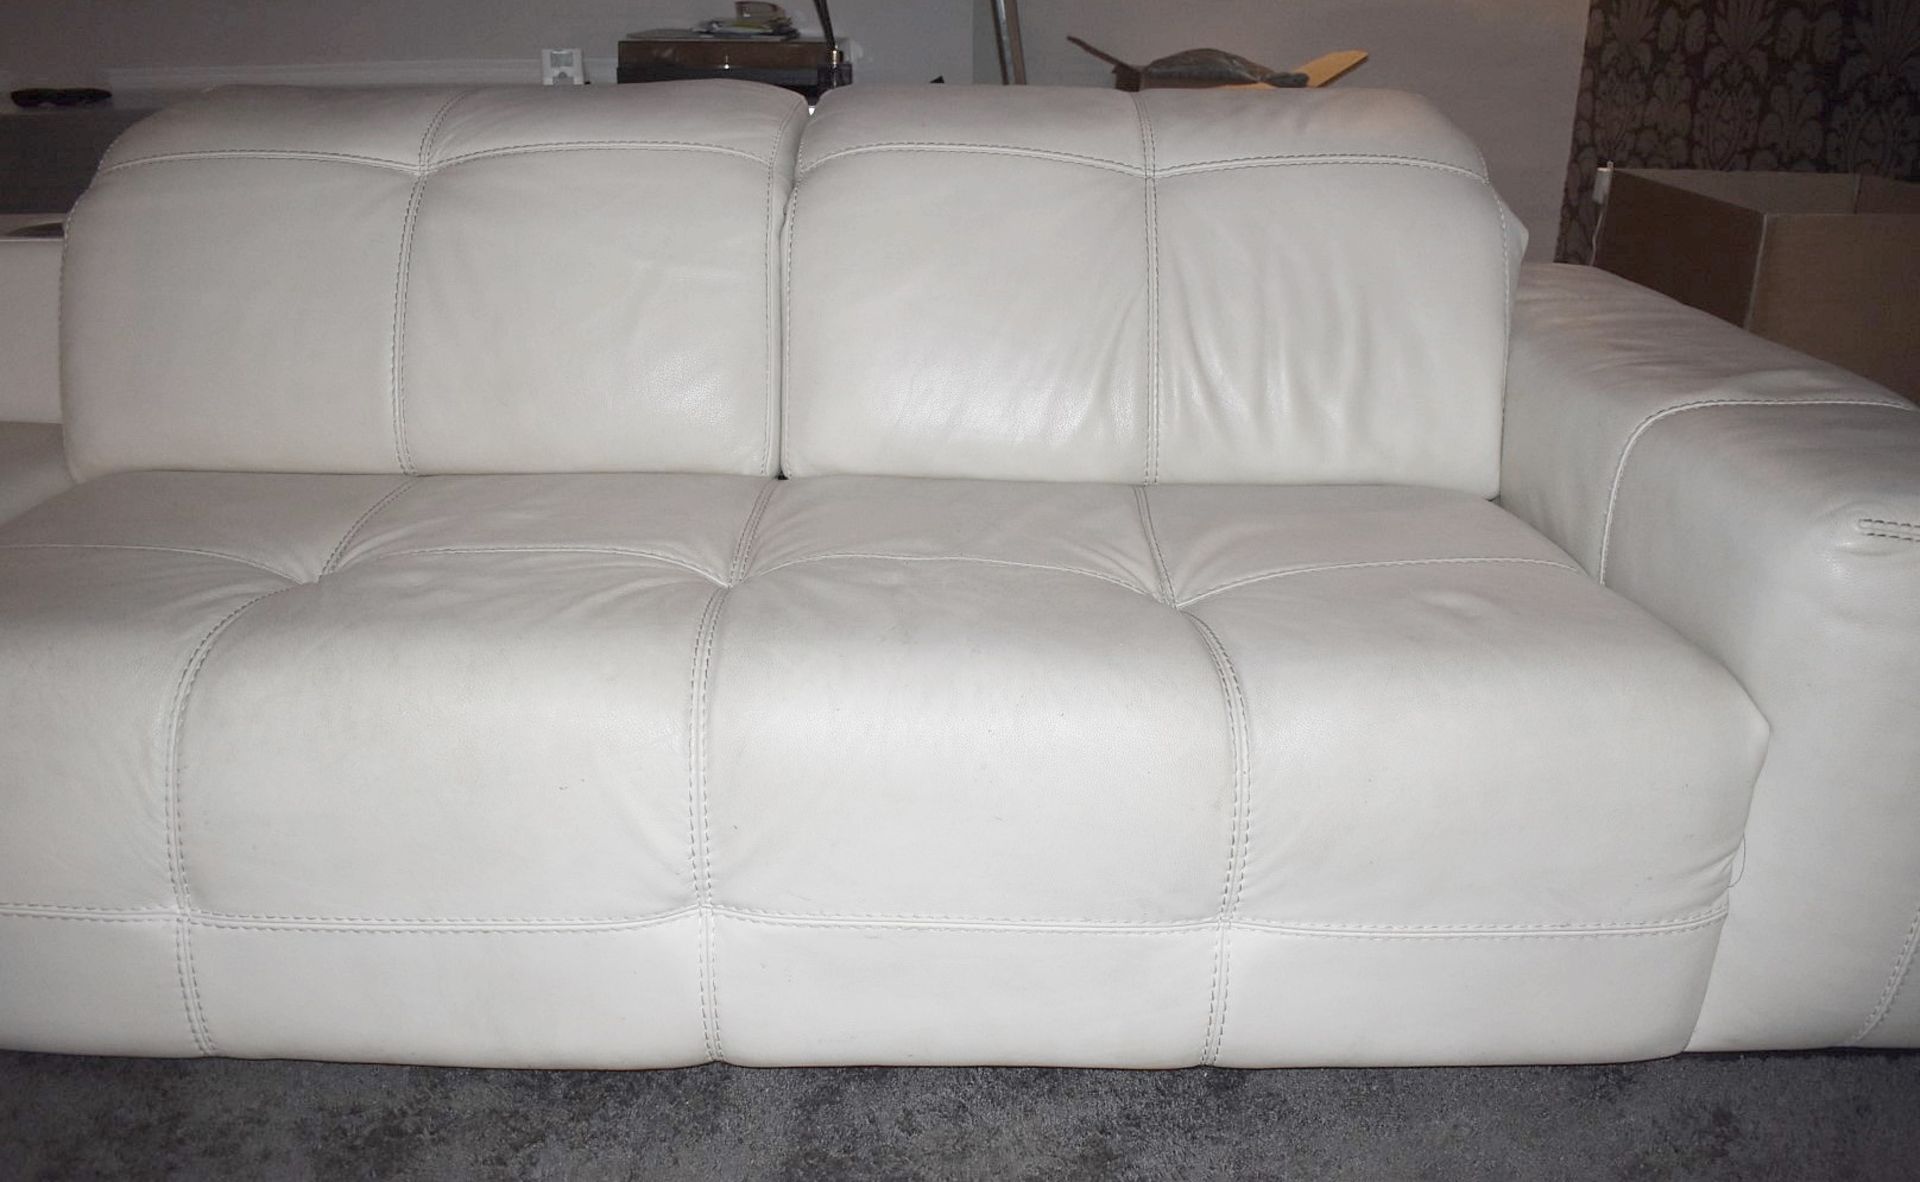 1 x NATUZZI Luxury White Leather Corner Sofa With Integrated Stereo Speakers And iPhone Dock - Cream - Image 5 of 13